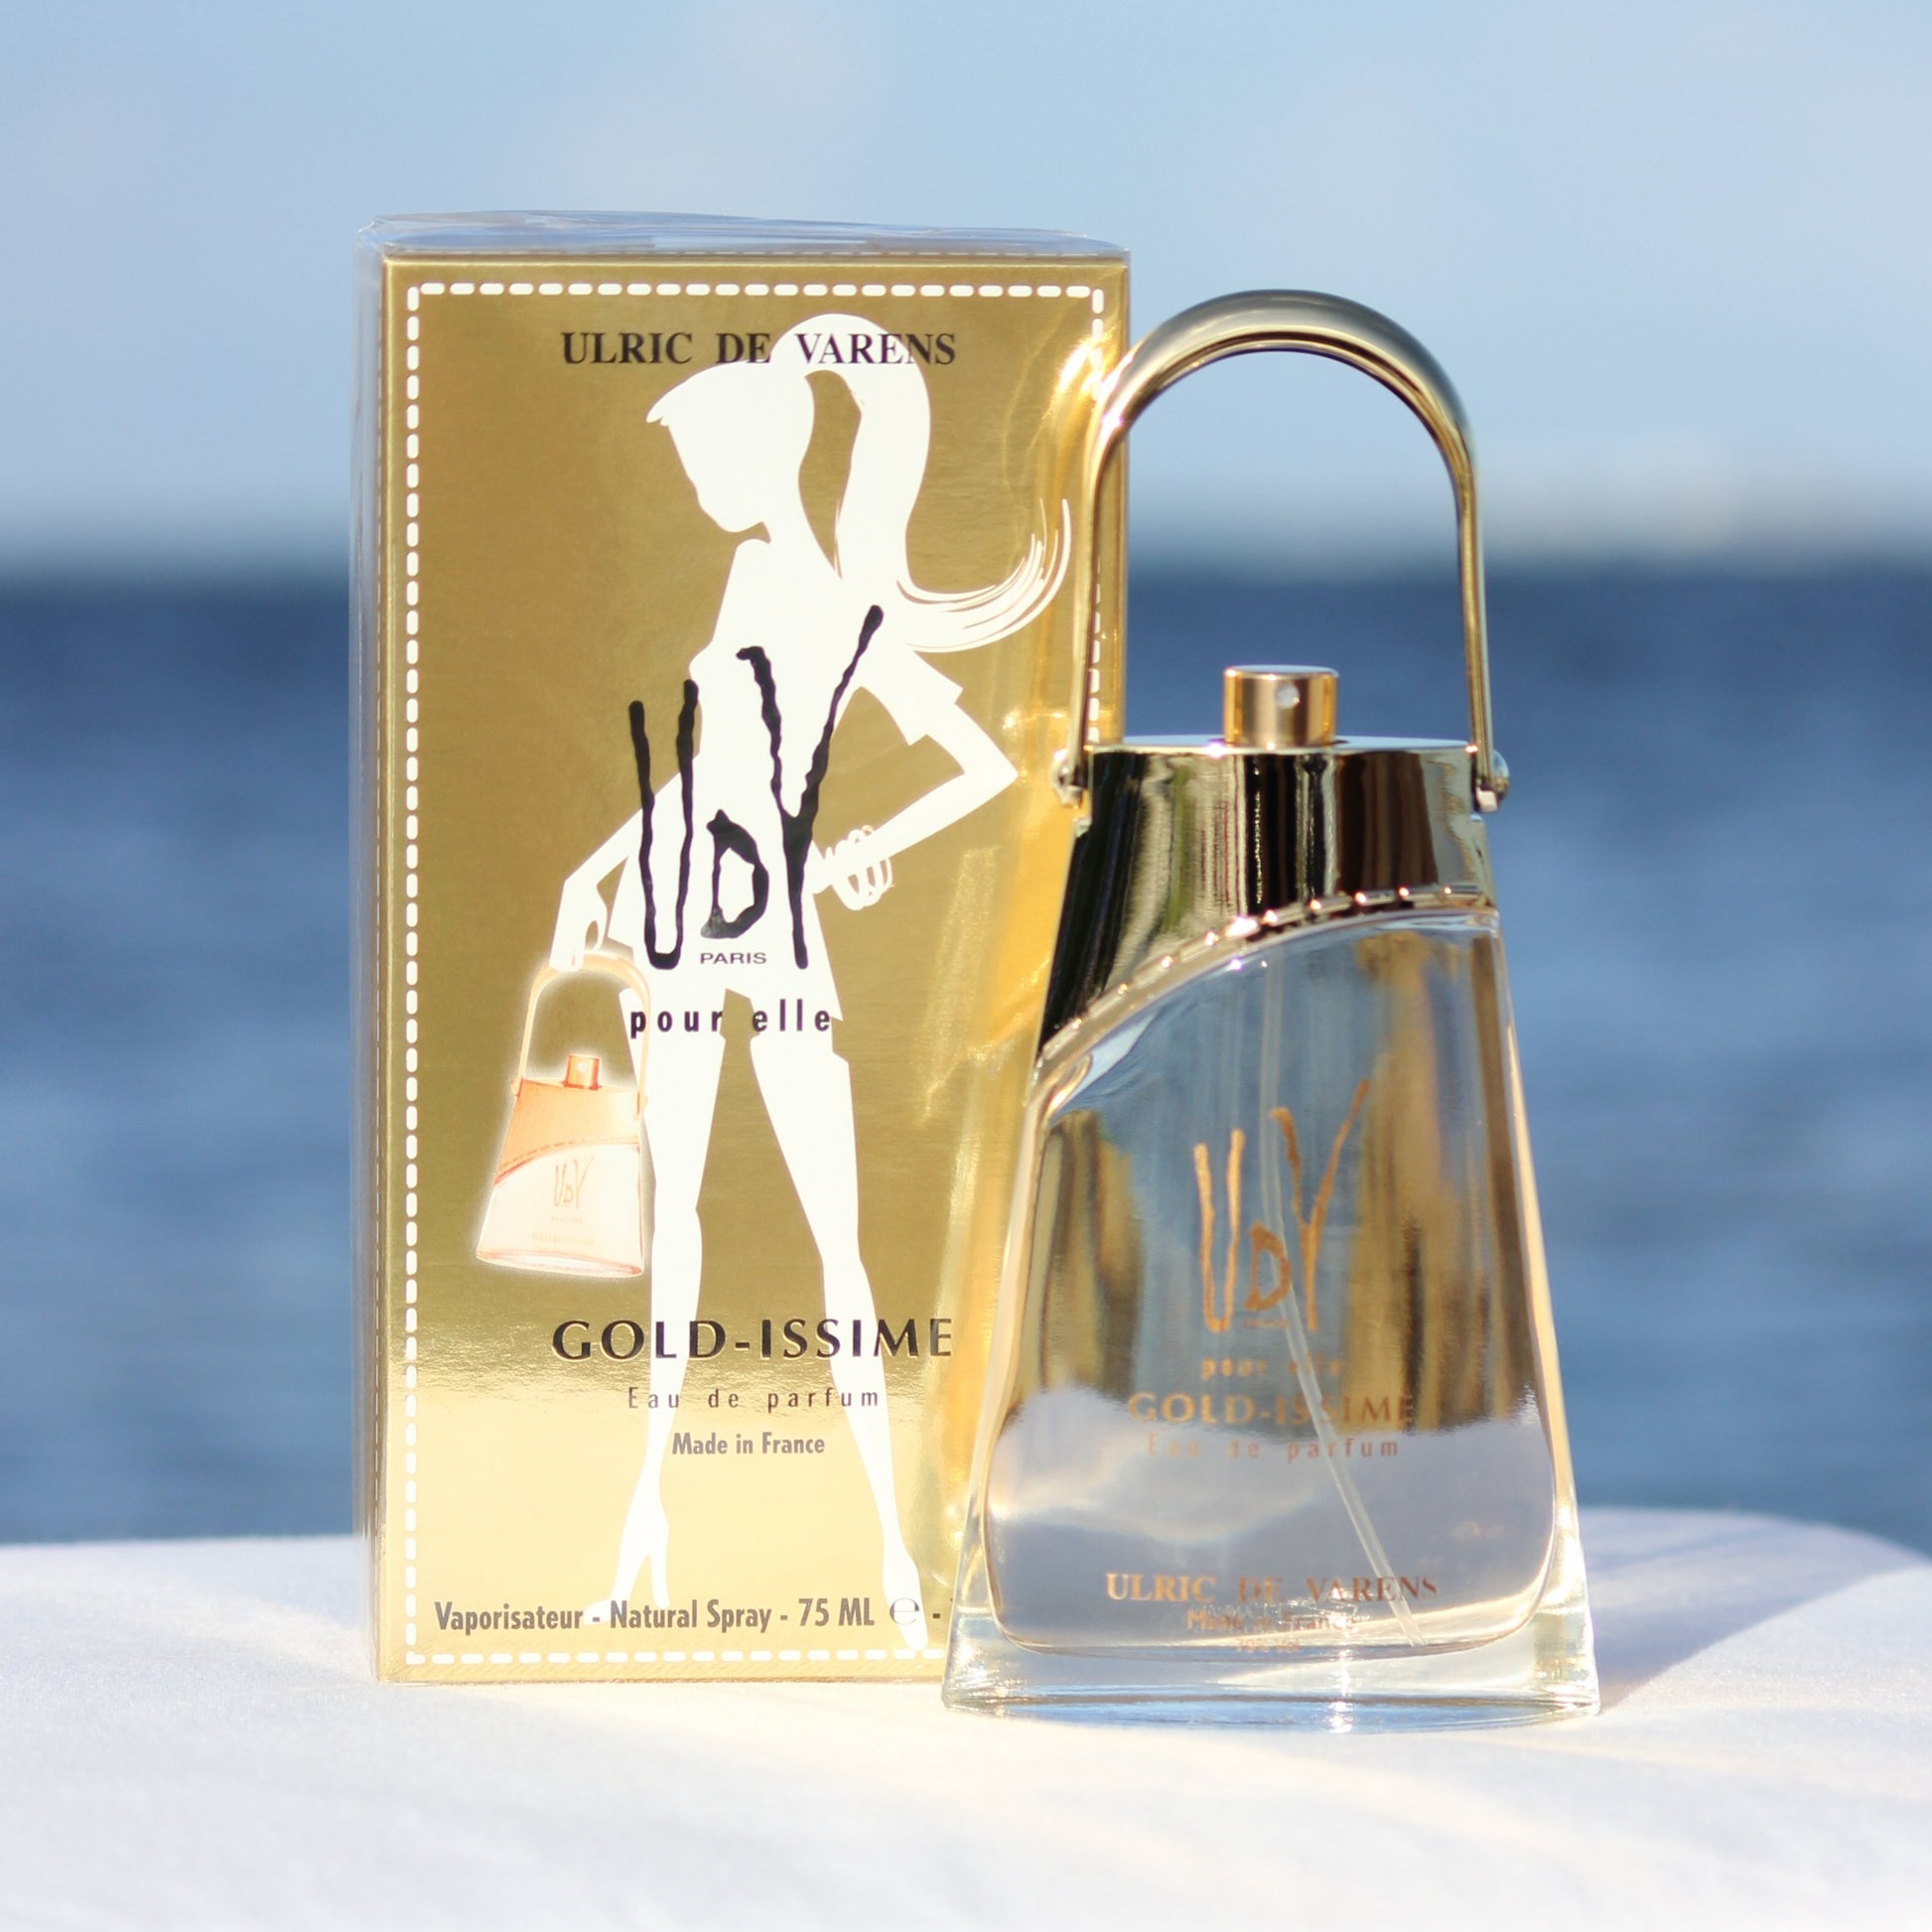 Ulric De Varens Gold-issime women's inexpensive perfume 2.5 EDP in front of beach